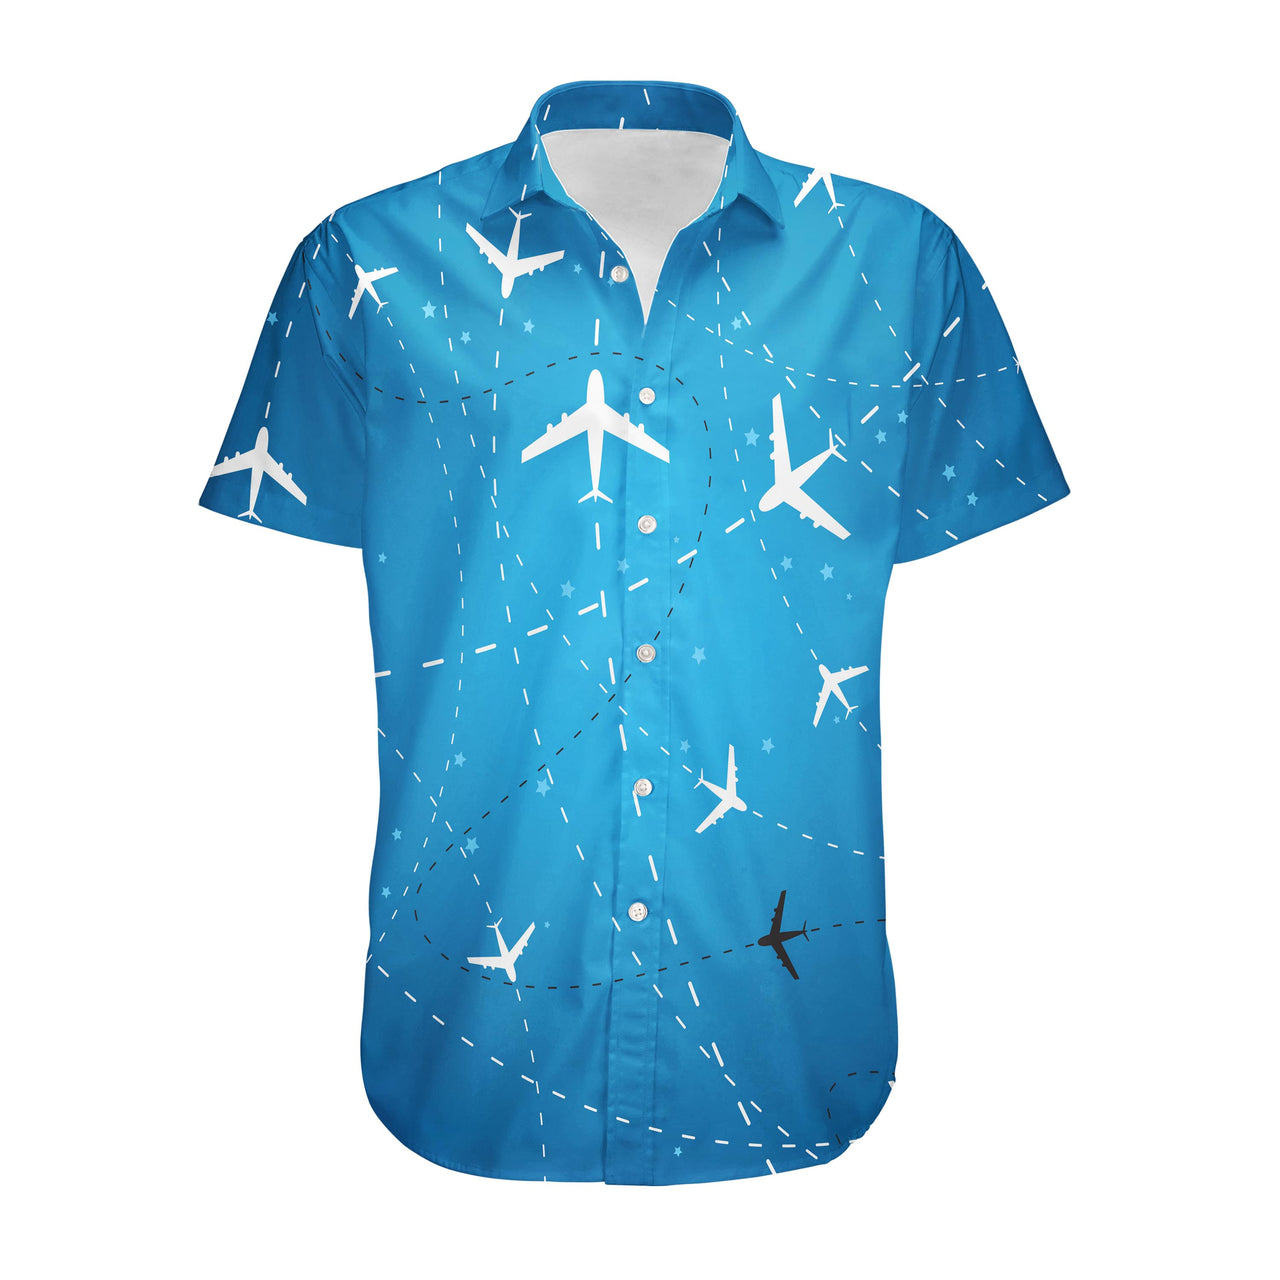 Travelling with Aircraft Designed 3D Shirts